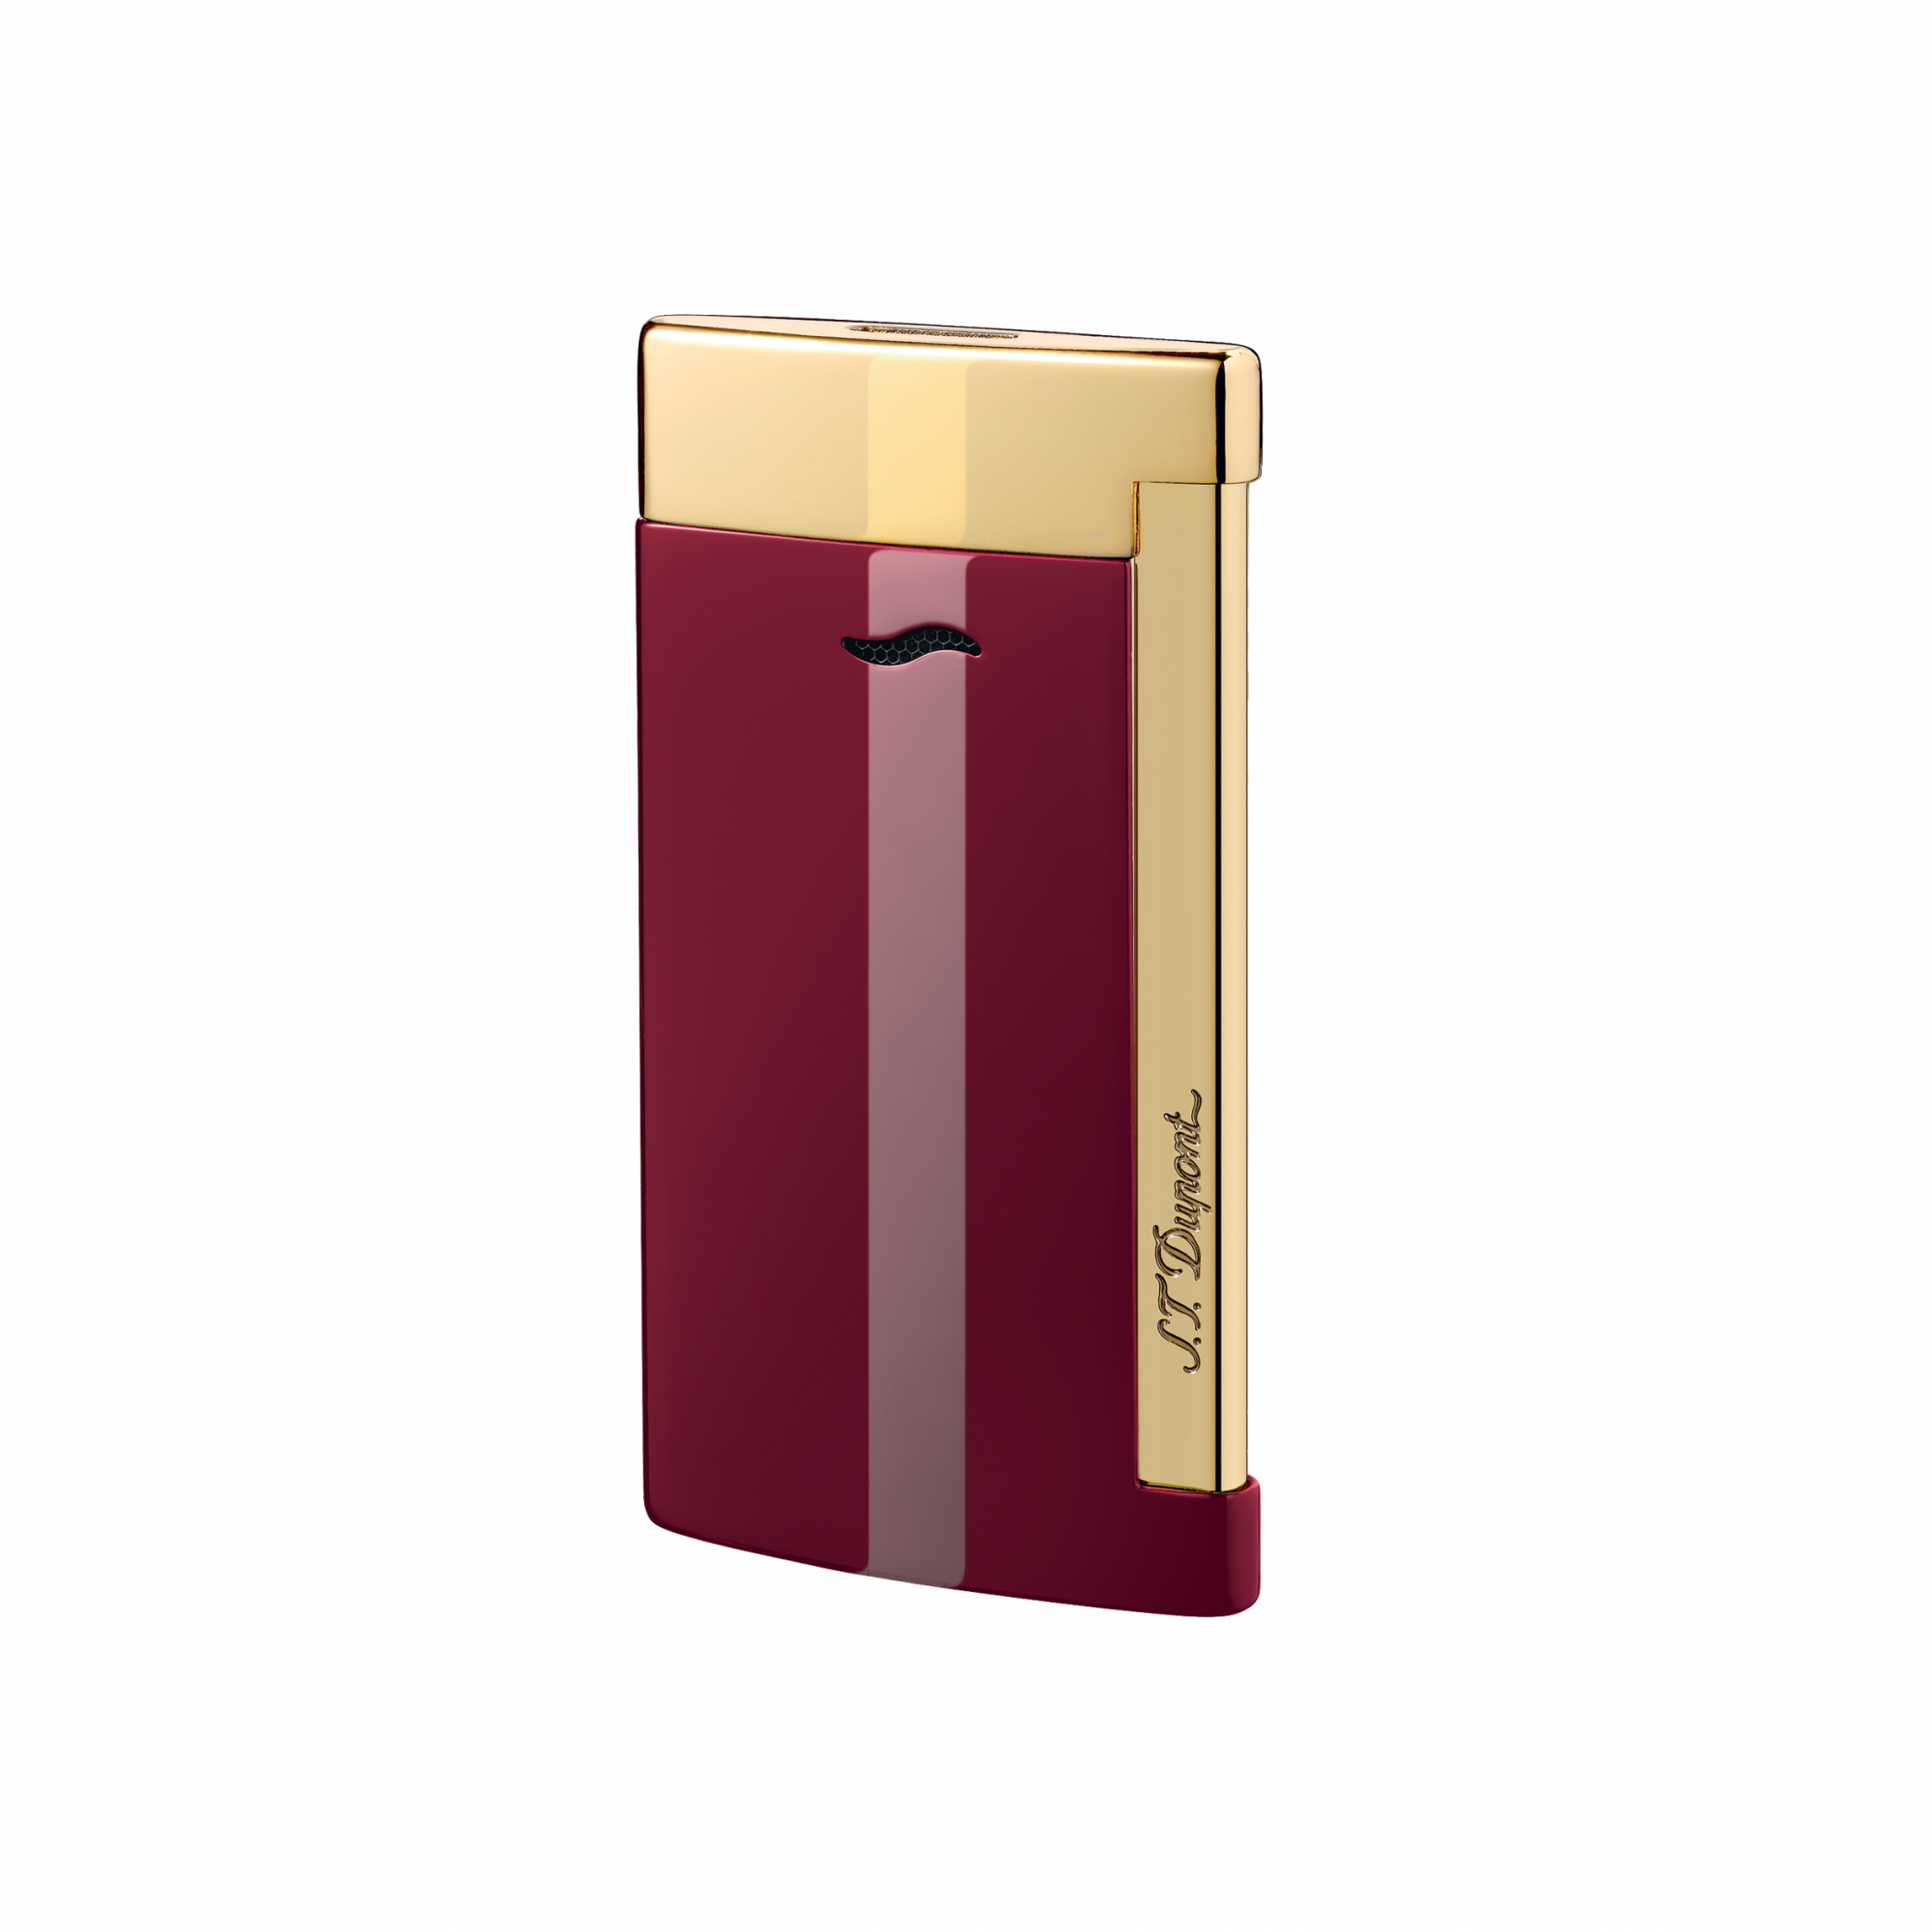 Slim 7, Red & Golden, Lighters By Dupont